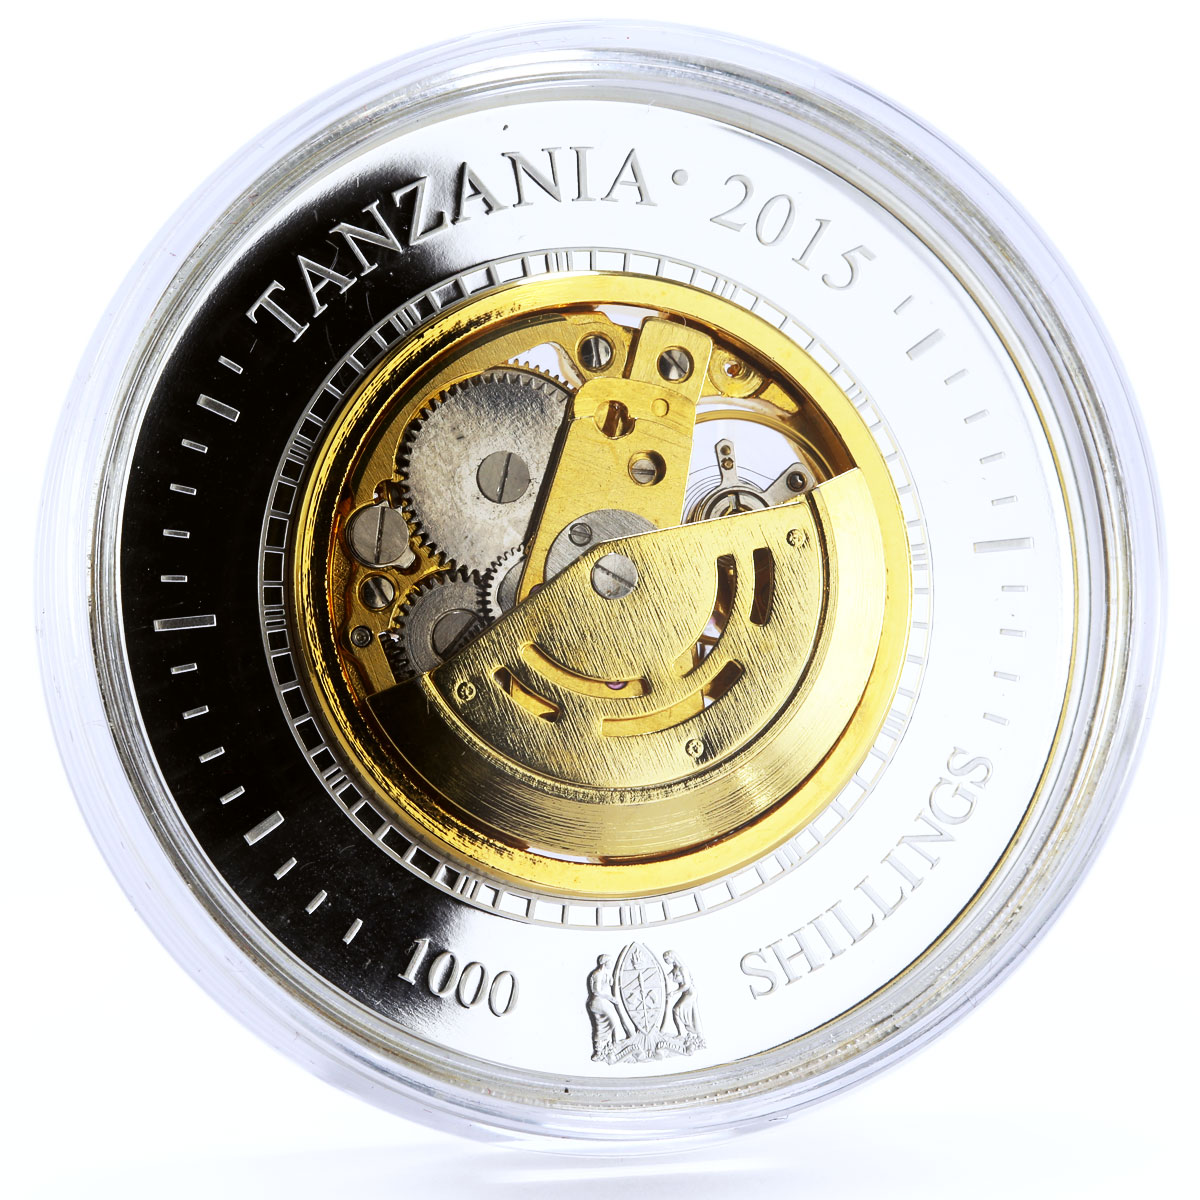 Tanzania set of 2 coins Evolution of Time Sand Clock gilded silver coins 2015